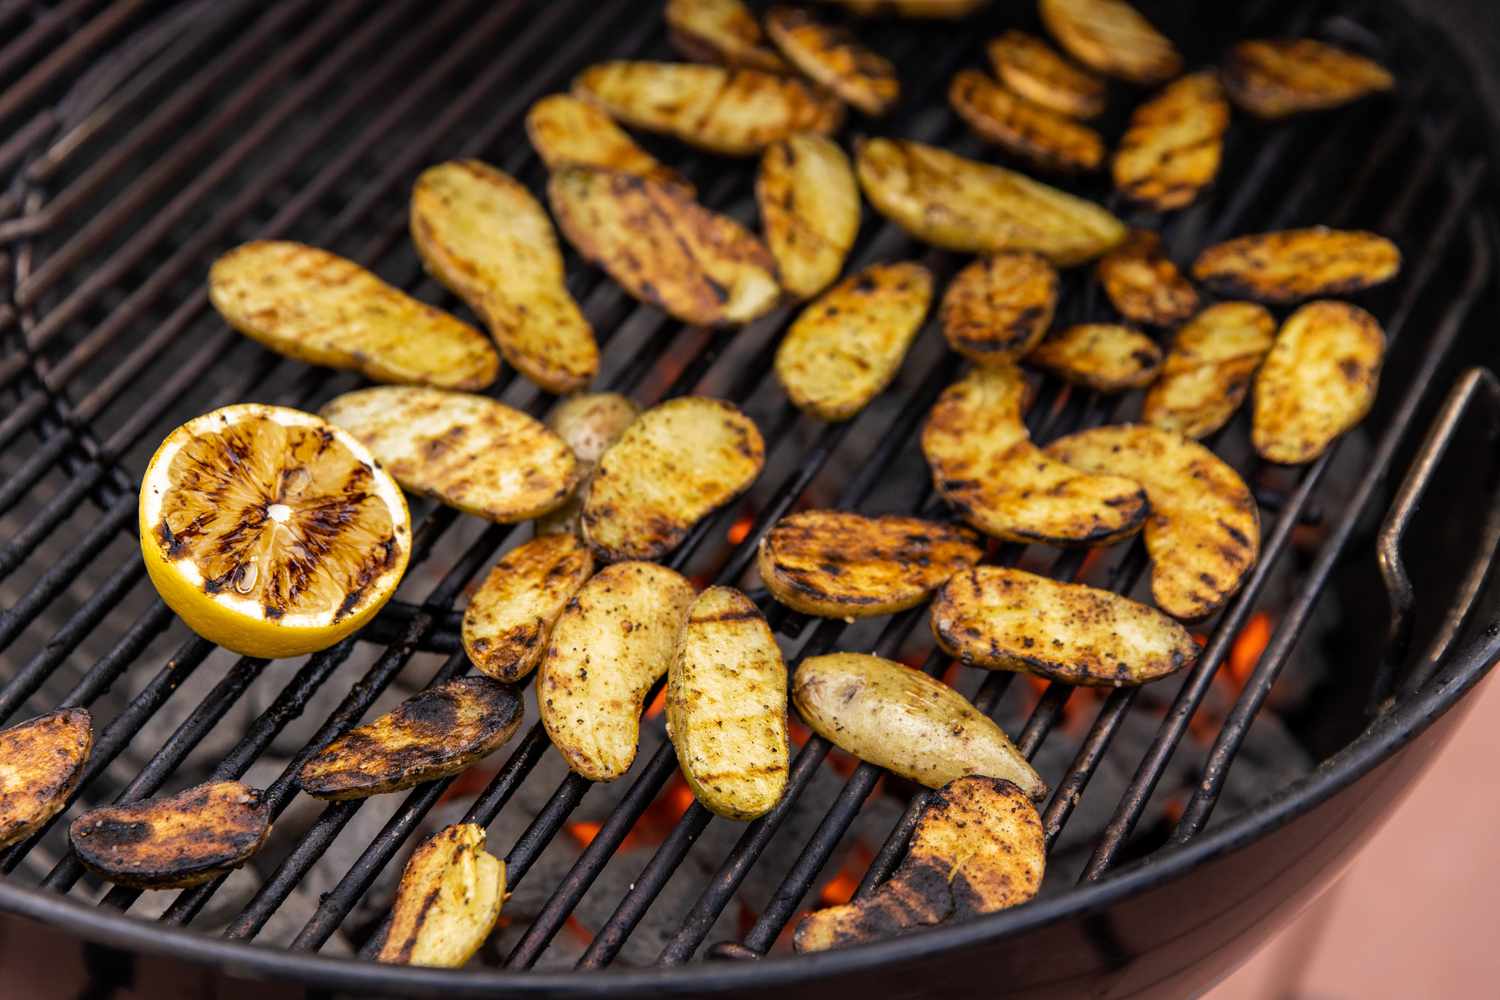 How To Grill Potatoes On A Charcoal Grill - Recipes.net